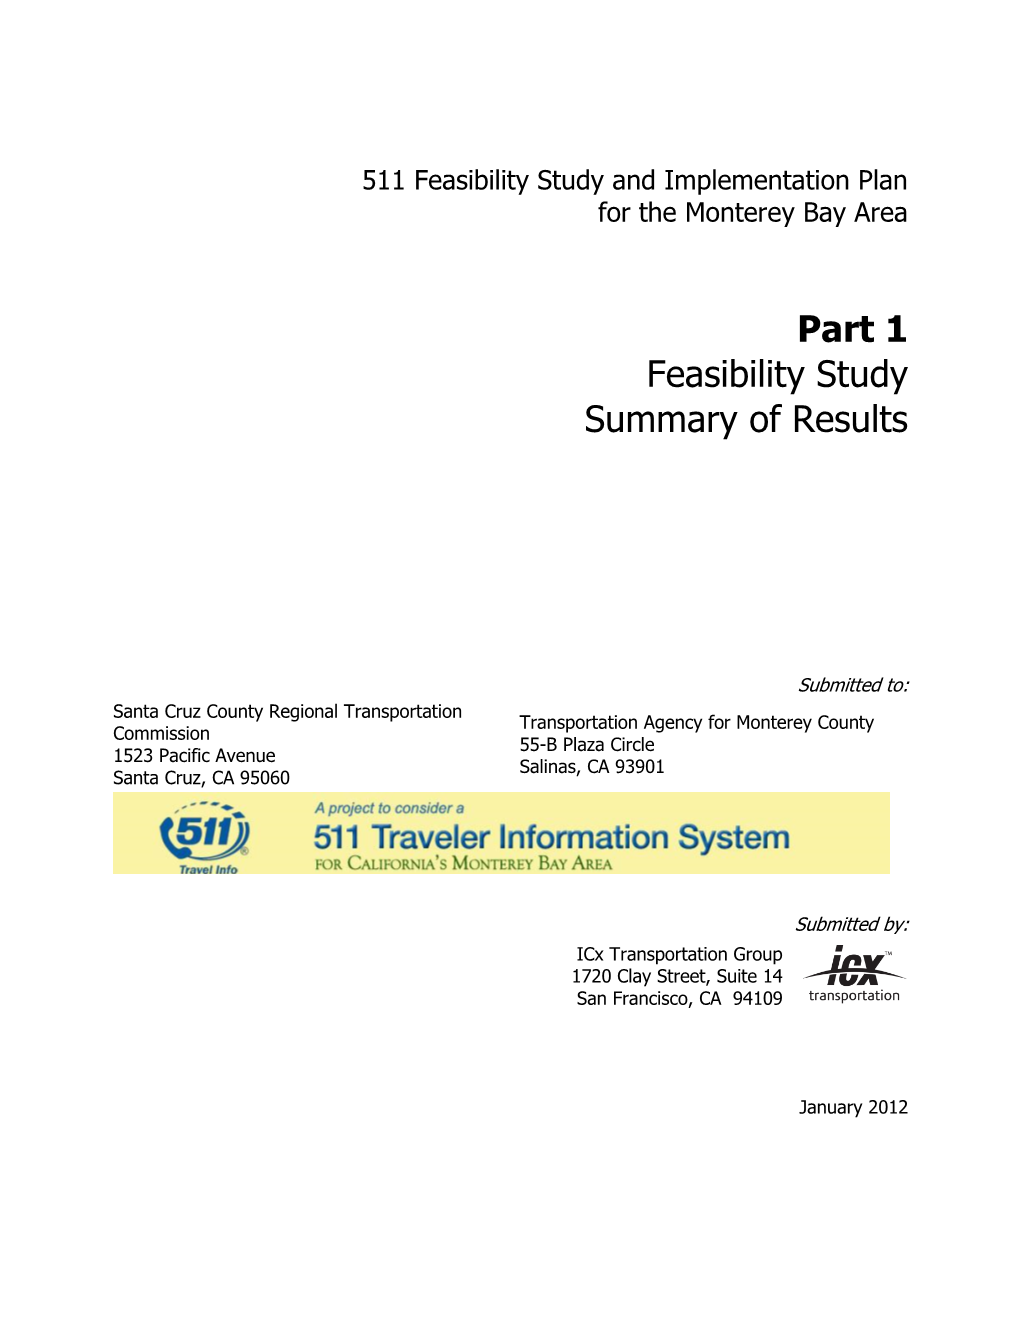 Monterey Bay Area 511 Feasibility Analysis Conducted for the Santa Cruz County Regional Transportation Commission and the Transportation Agency for Monterey County